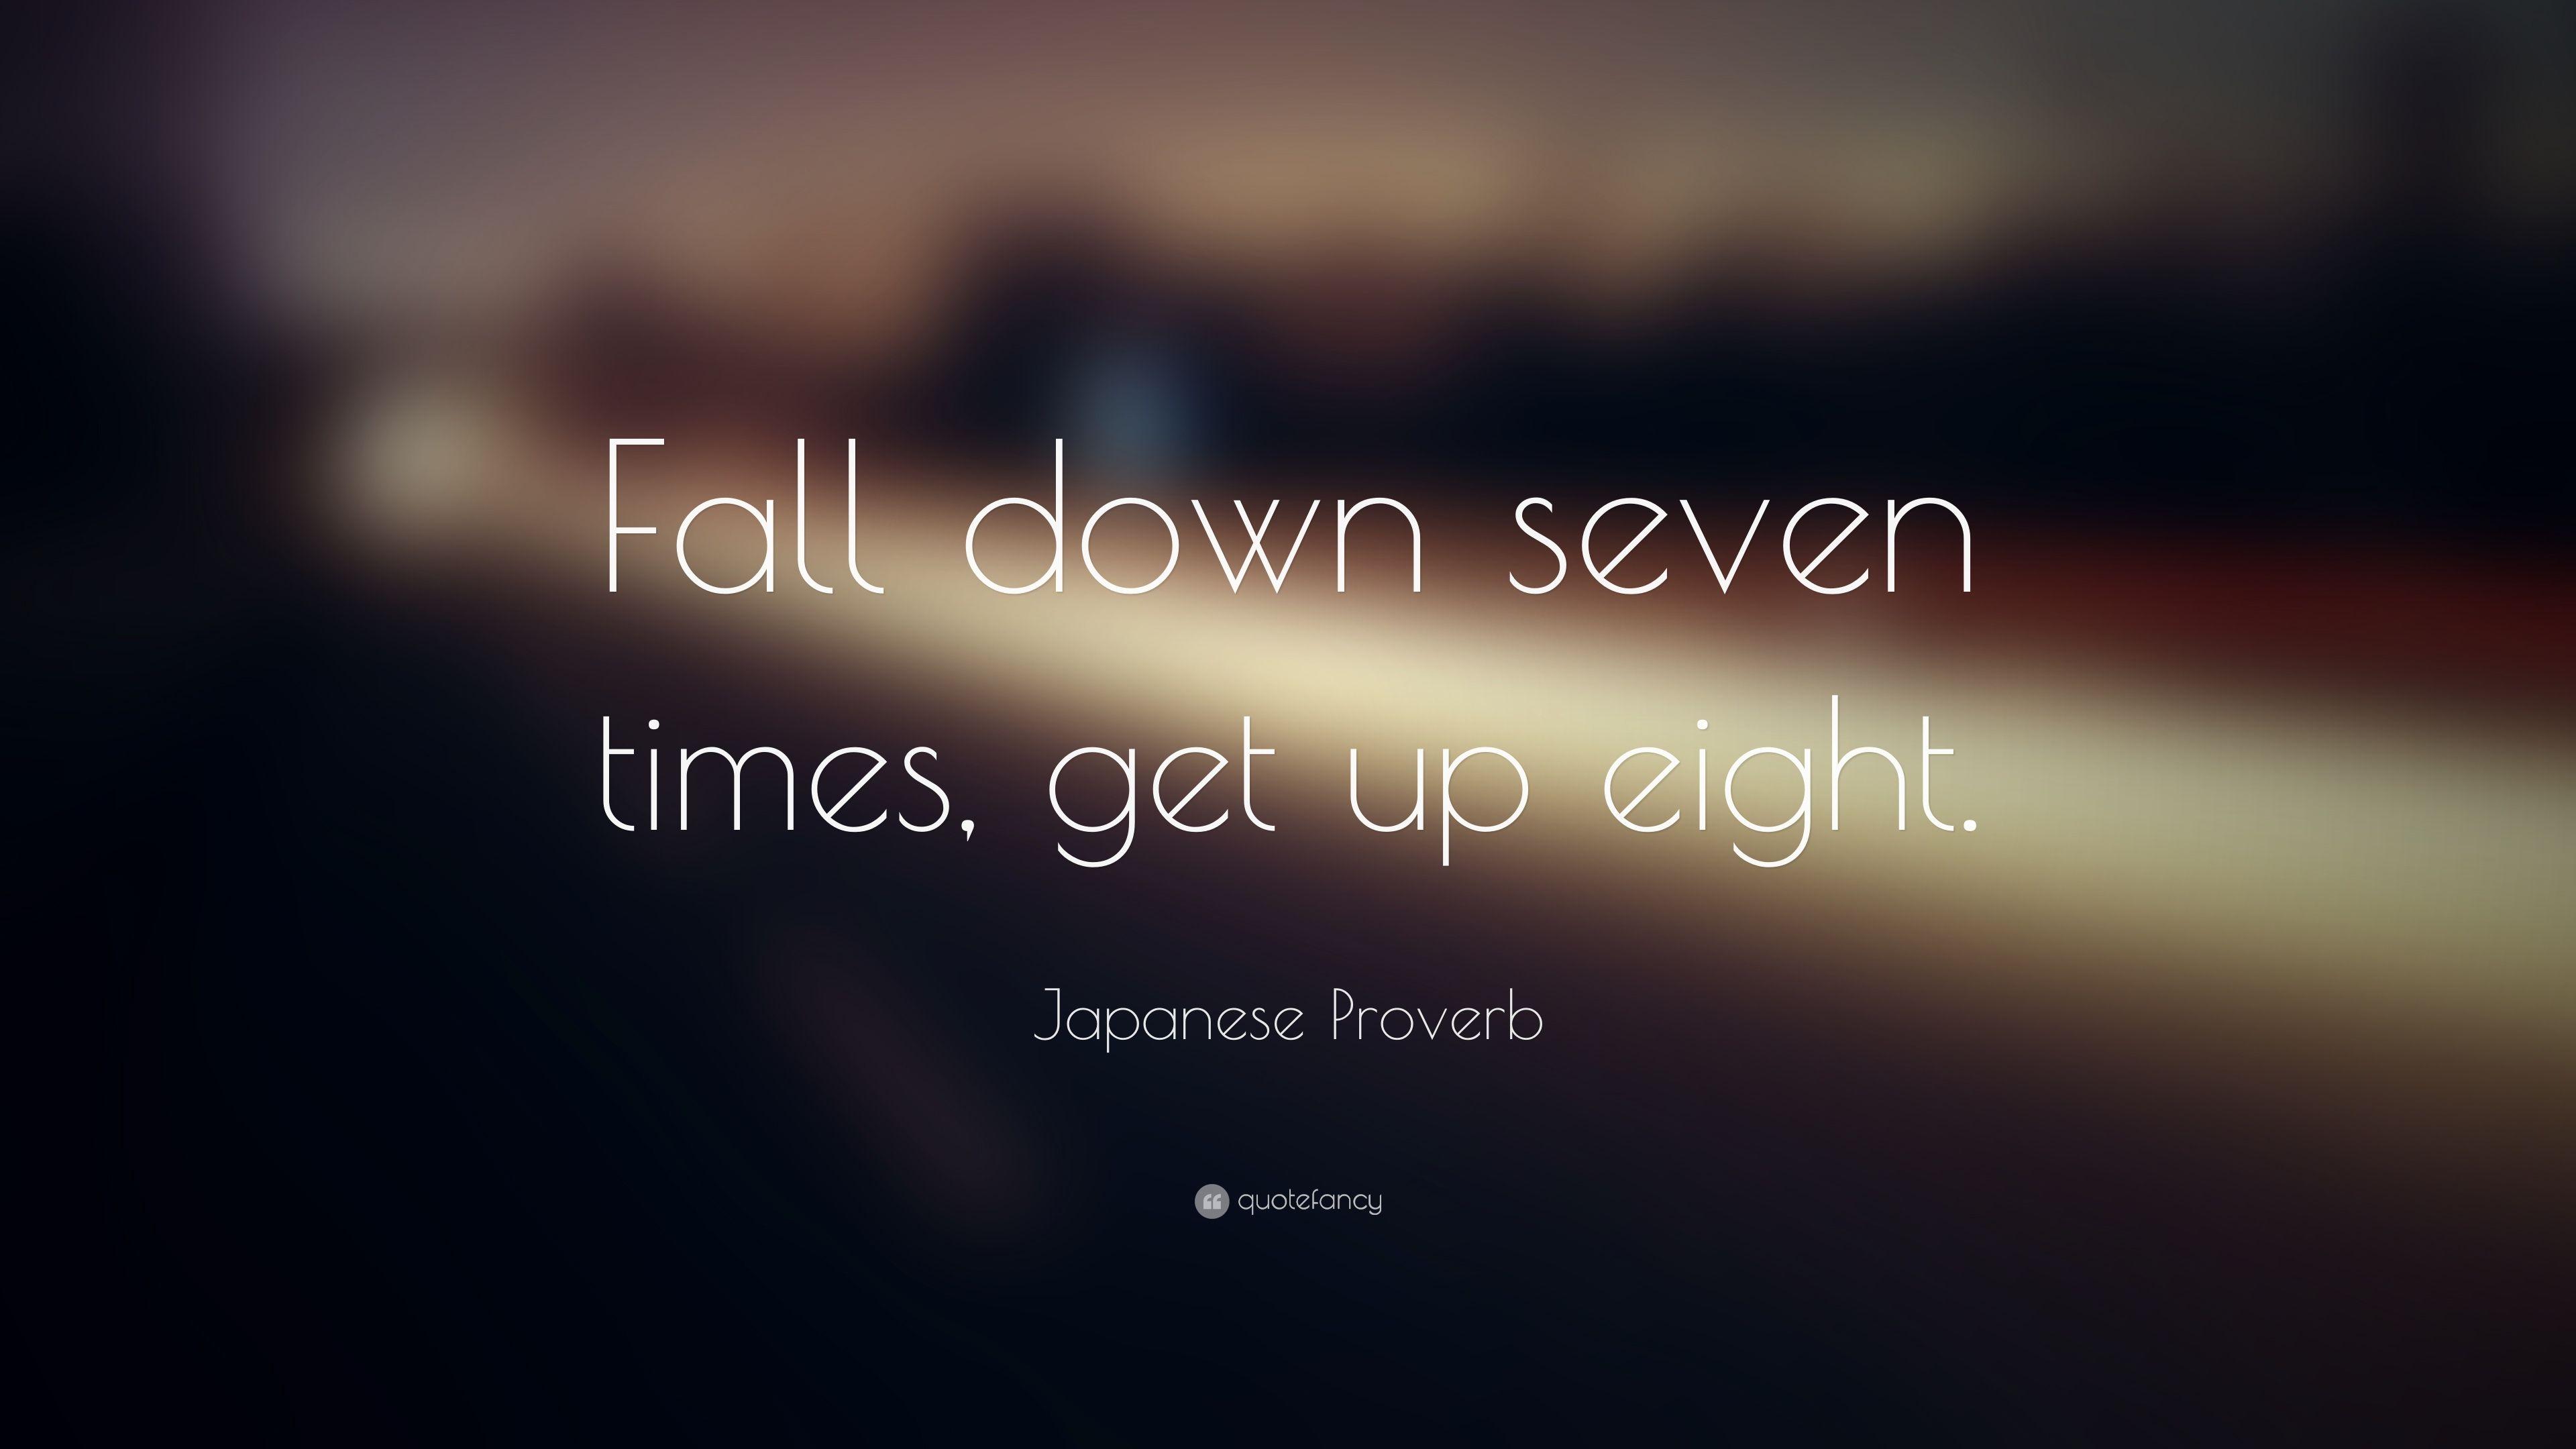 Japanese Proverb Quote: “Fall down seven times, get up eight.” 34